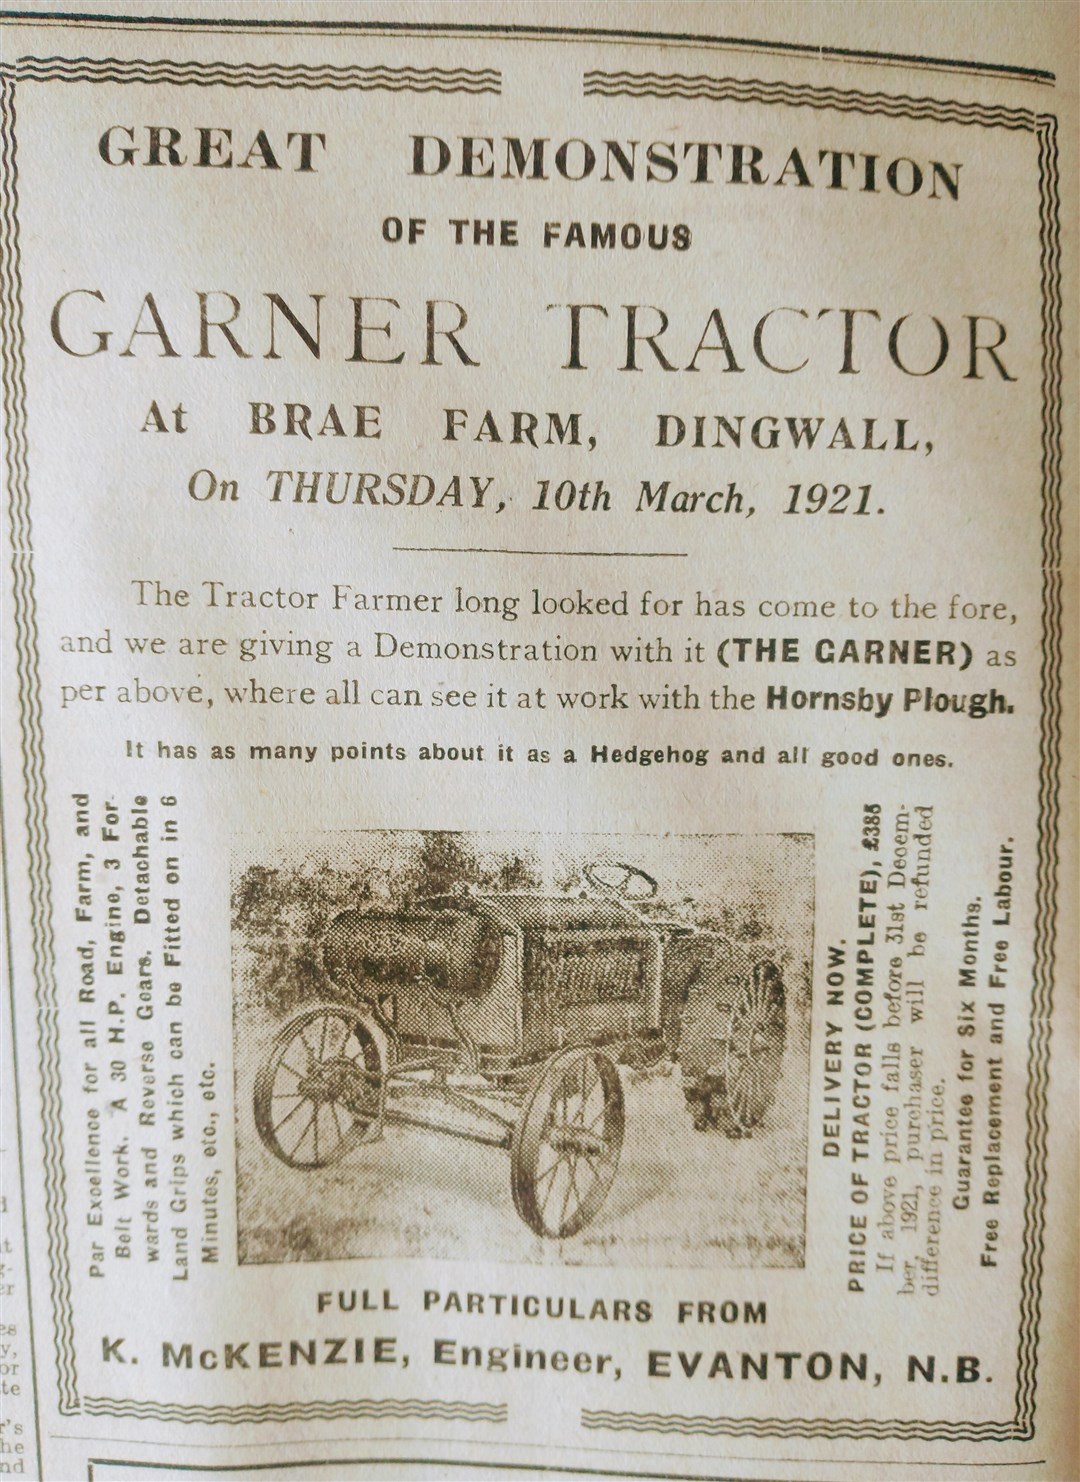 An advert for a tractor demonstration in Ross-shire 100 years ago.